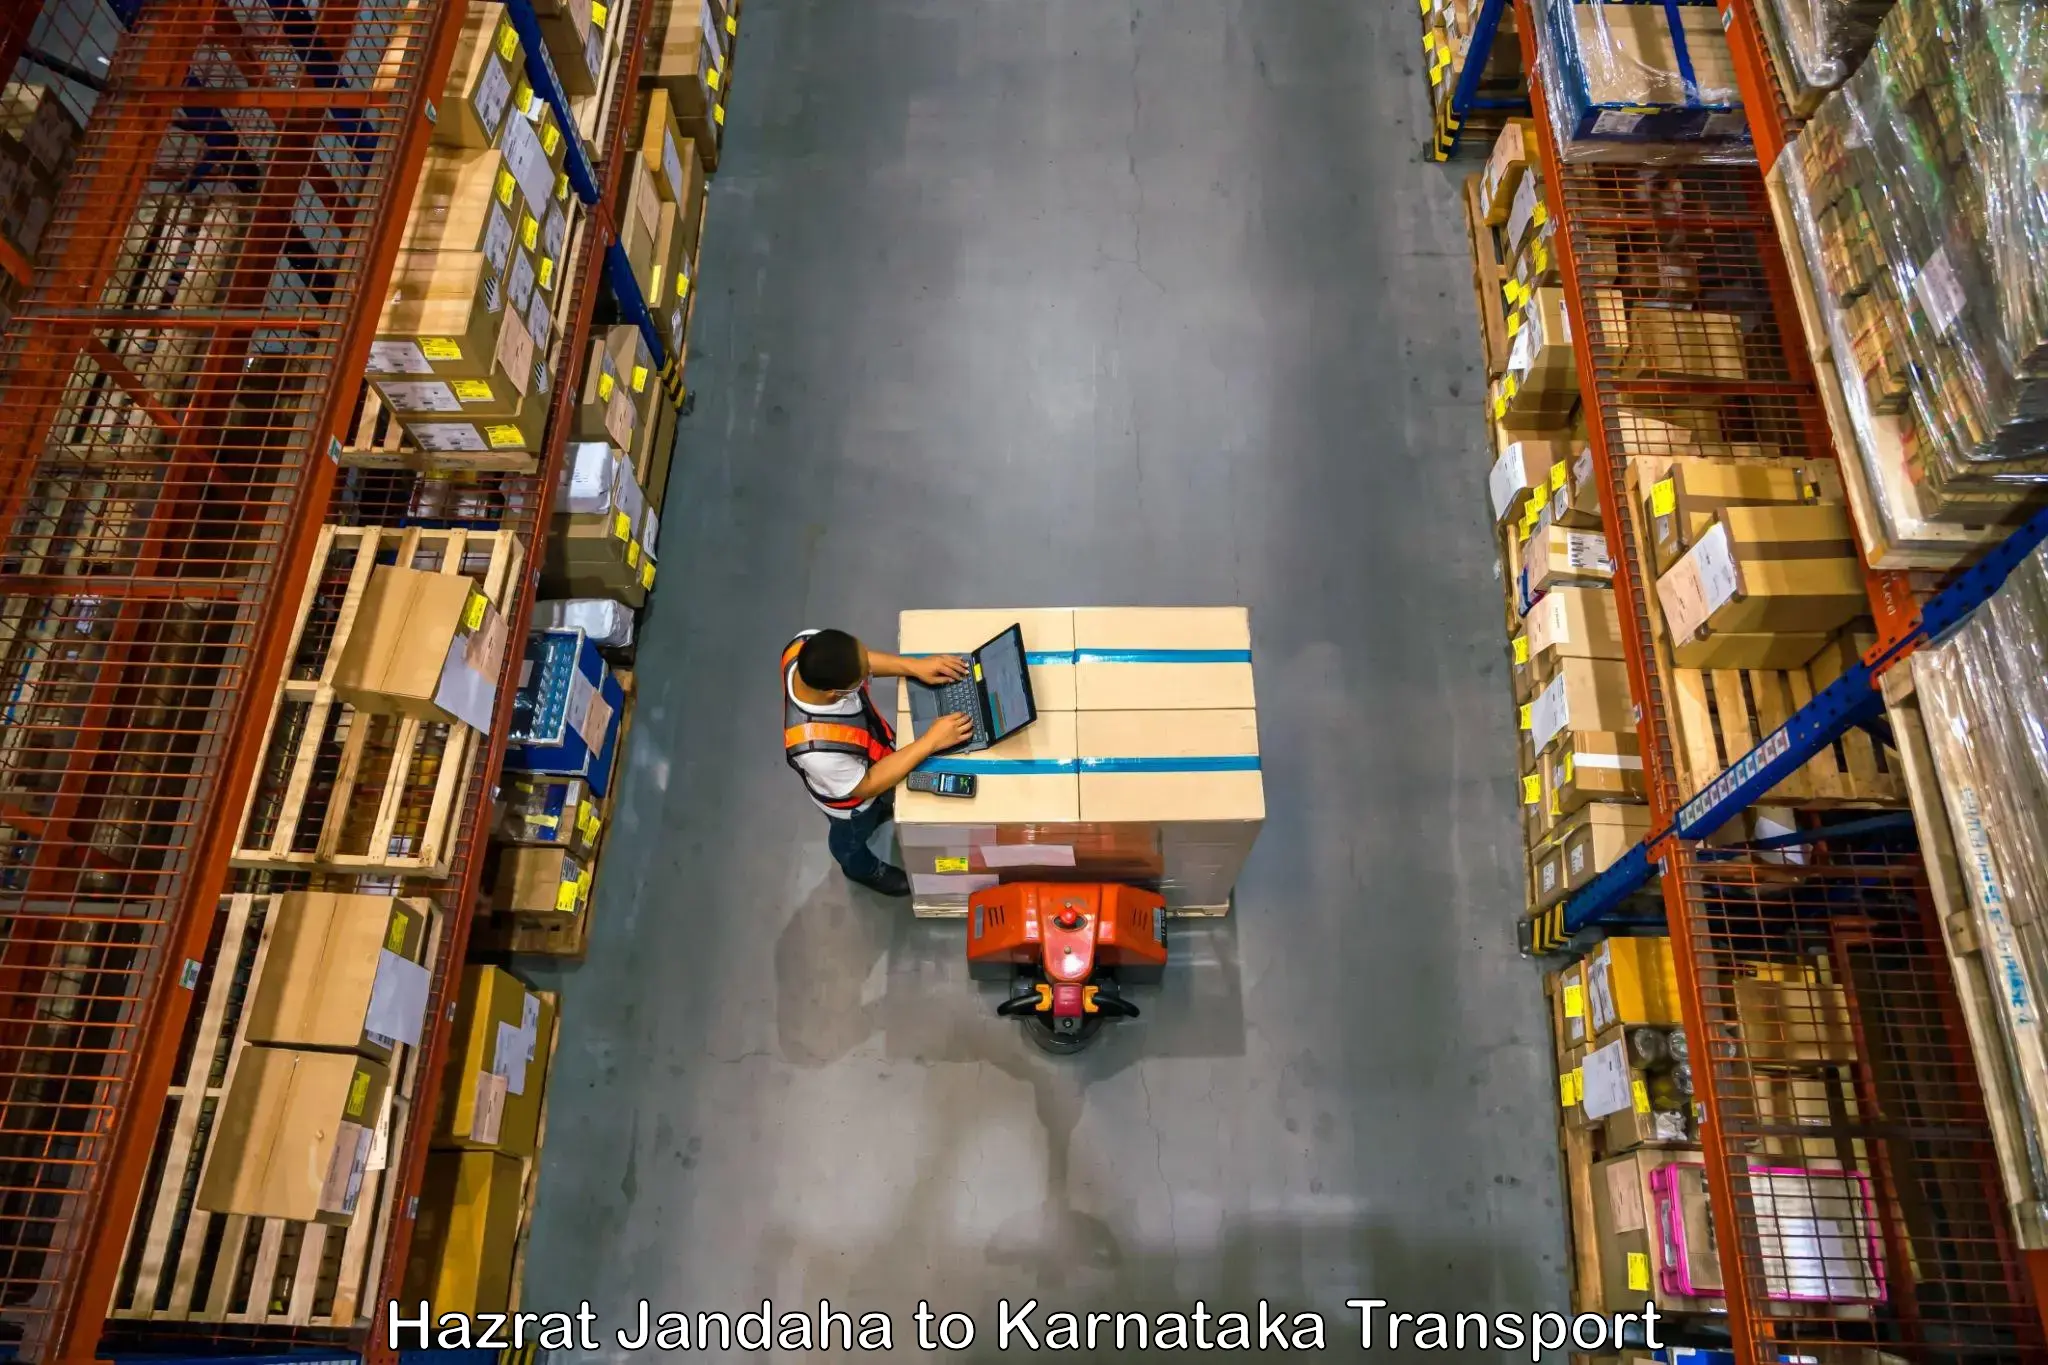 Container transport service Hazrat Jandaha to Manipal